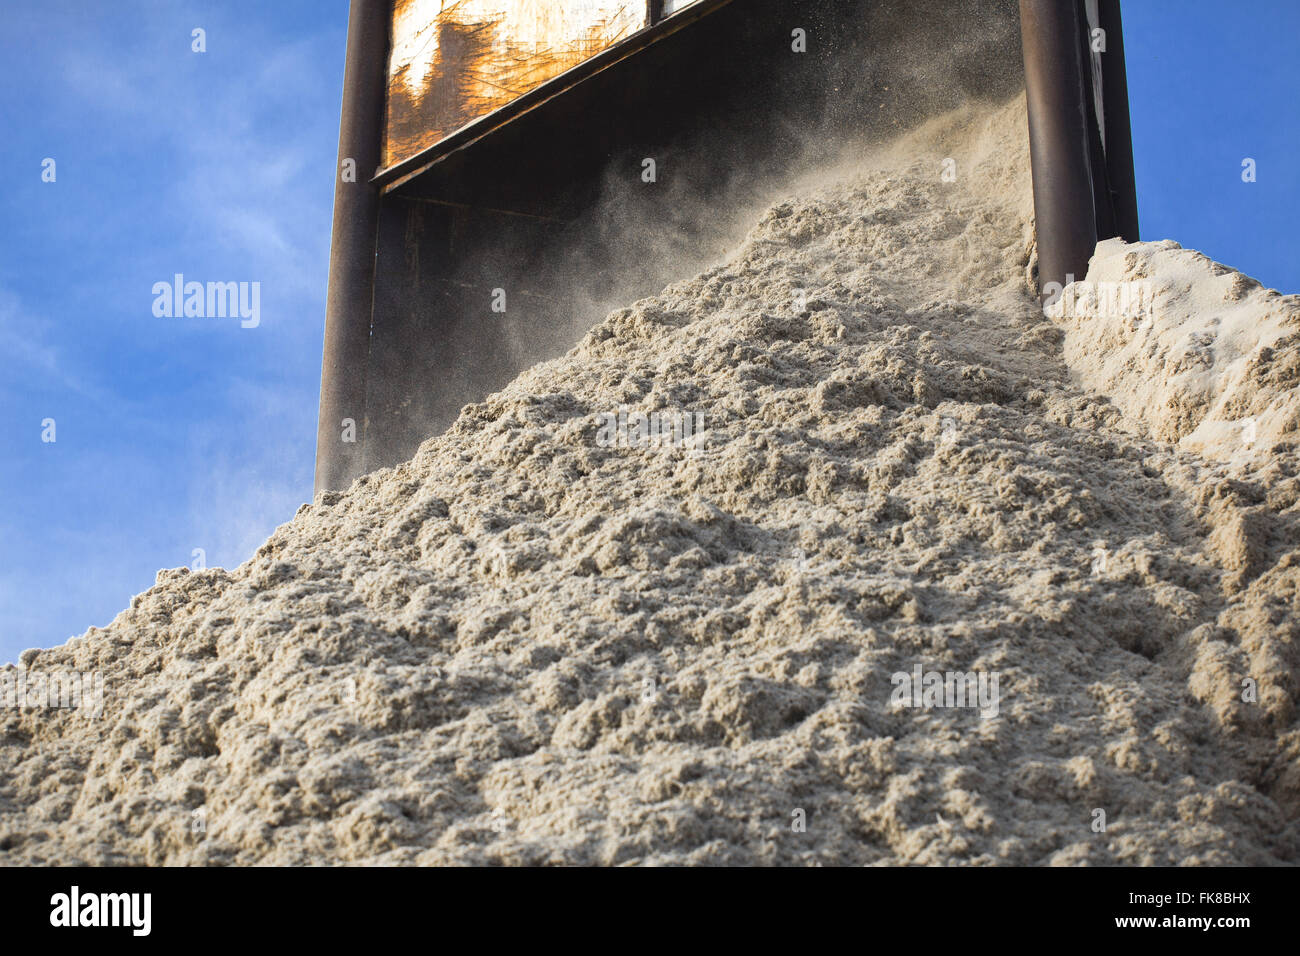 Bagasse from sugar cane after grinding for power generation Stock Photo